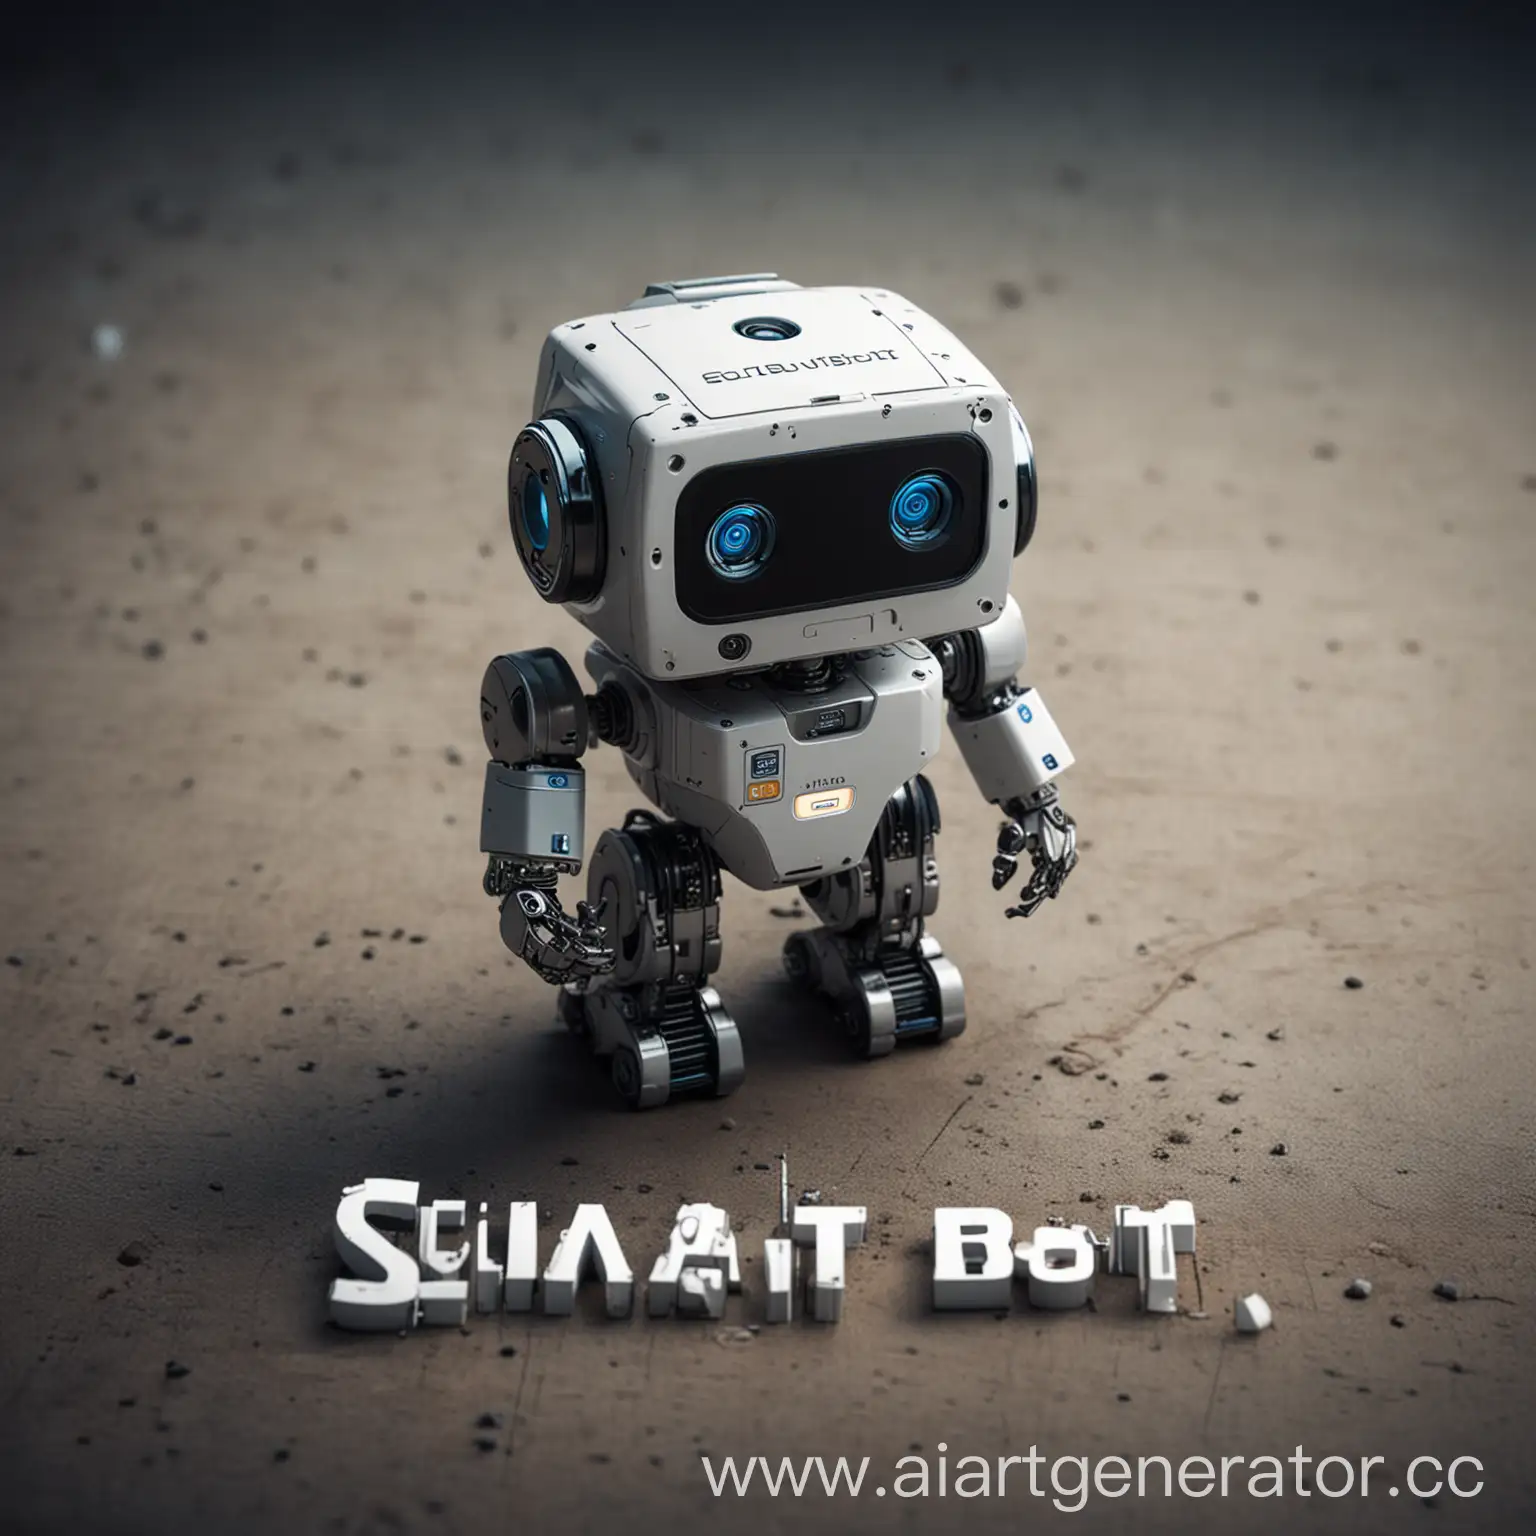 Futuristic-Solver-Bot-Robot-with-Digital-Display